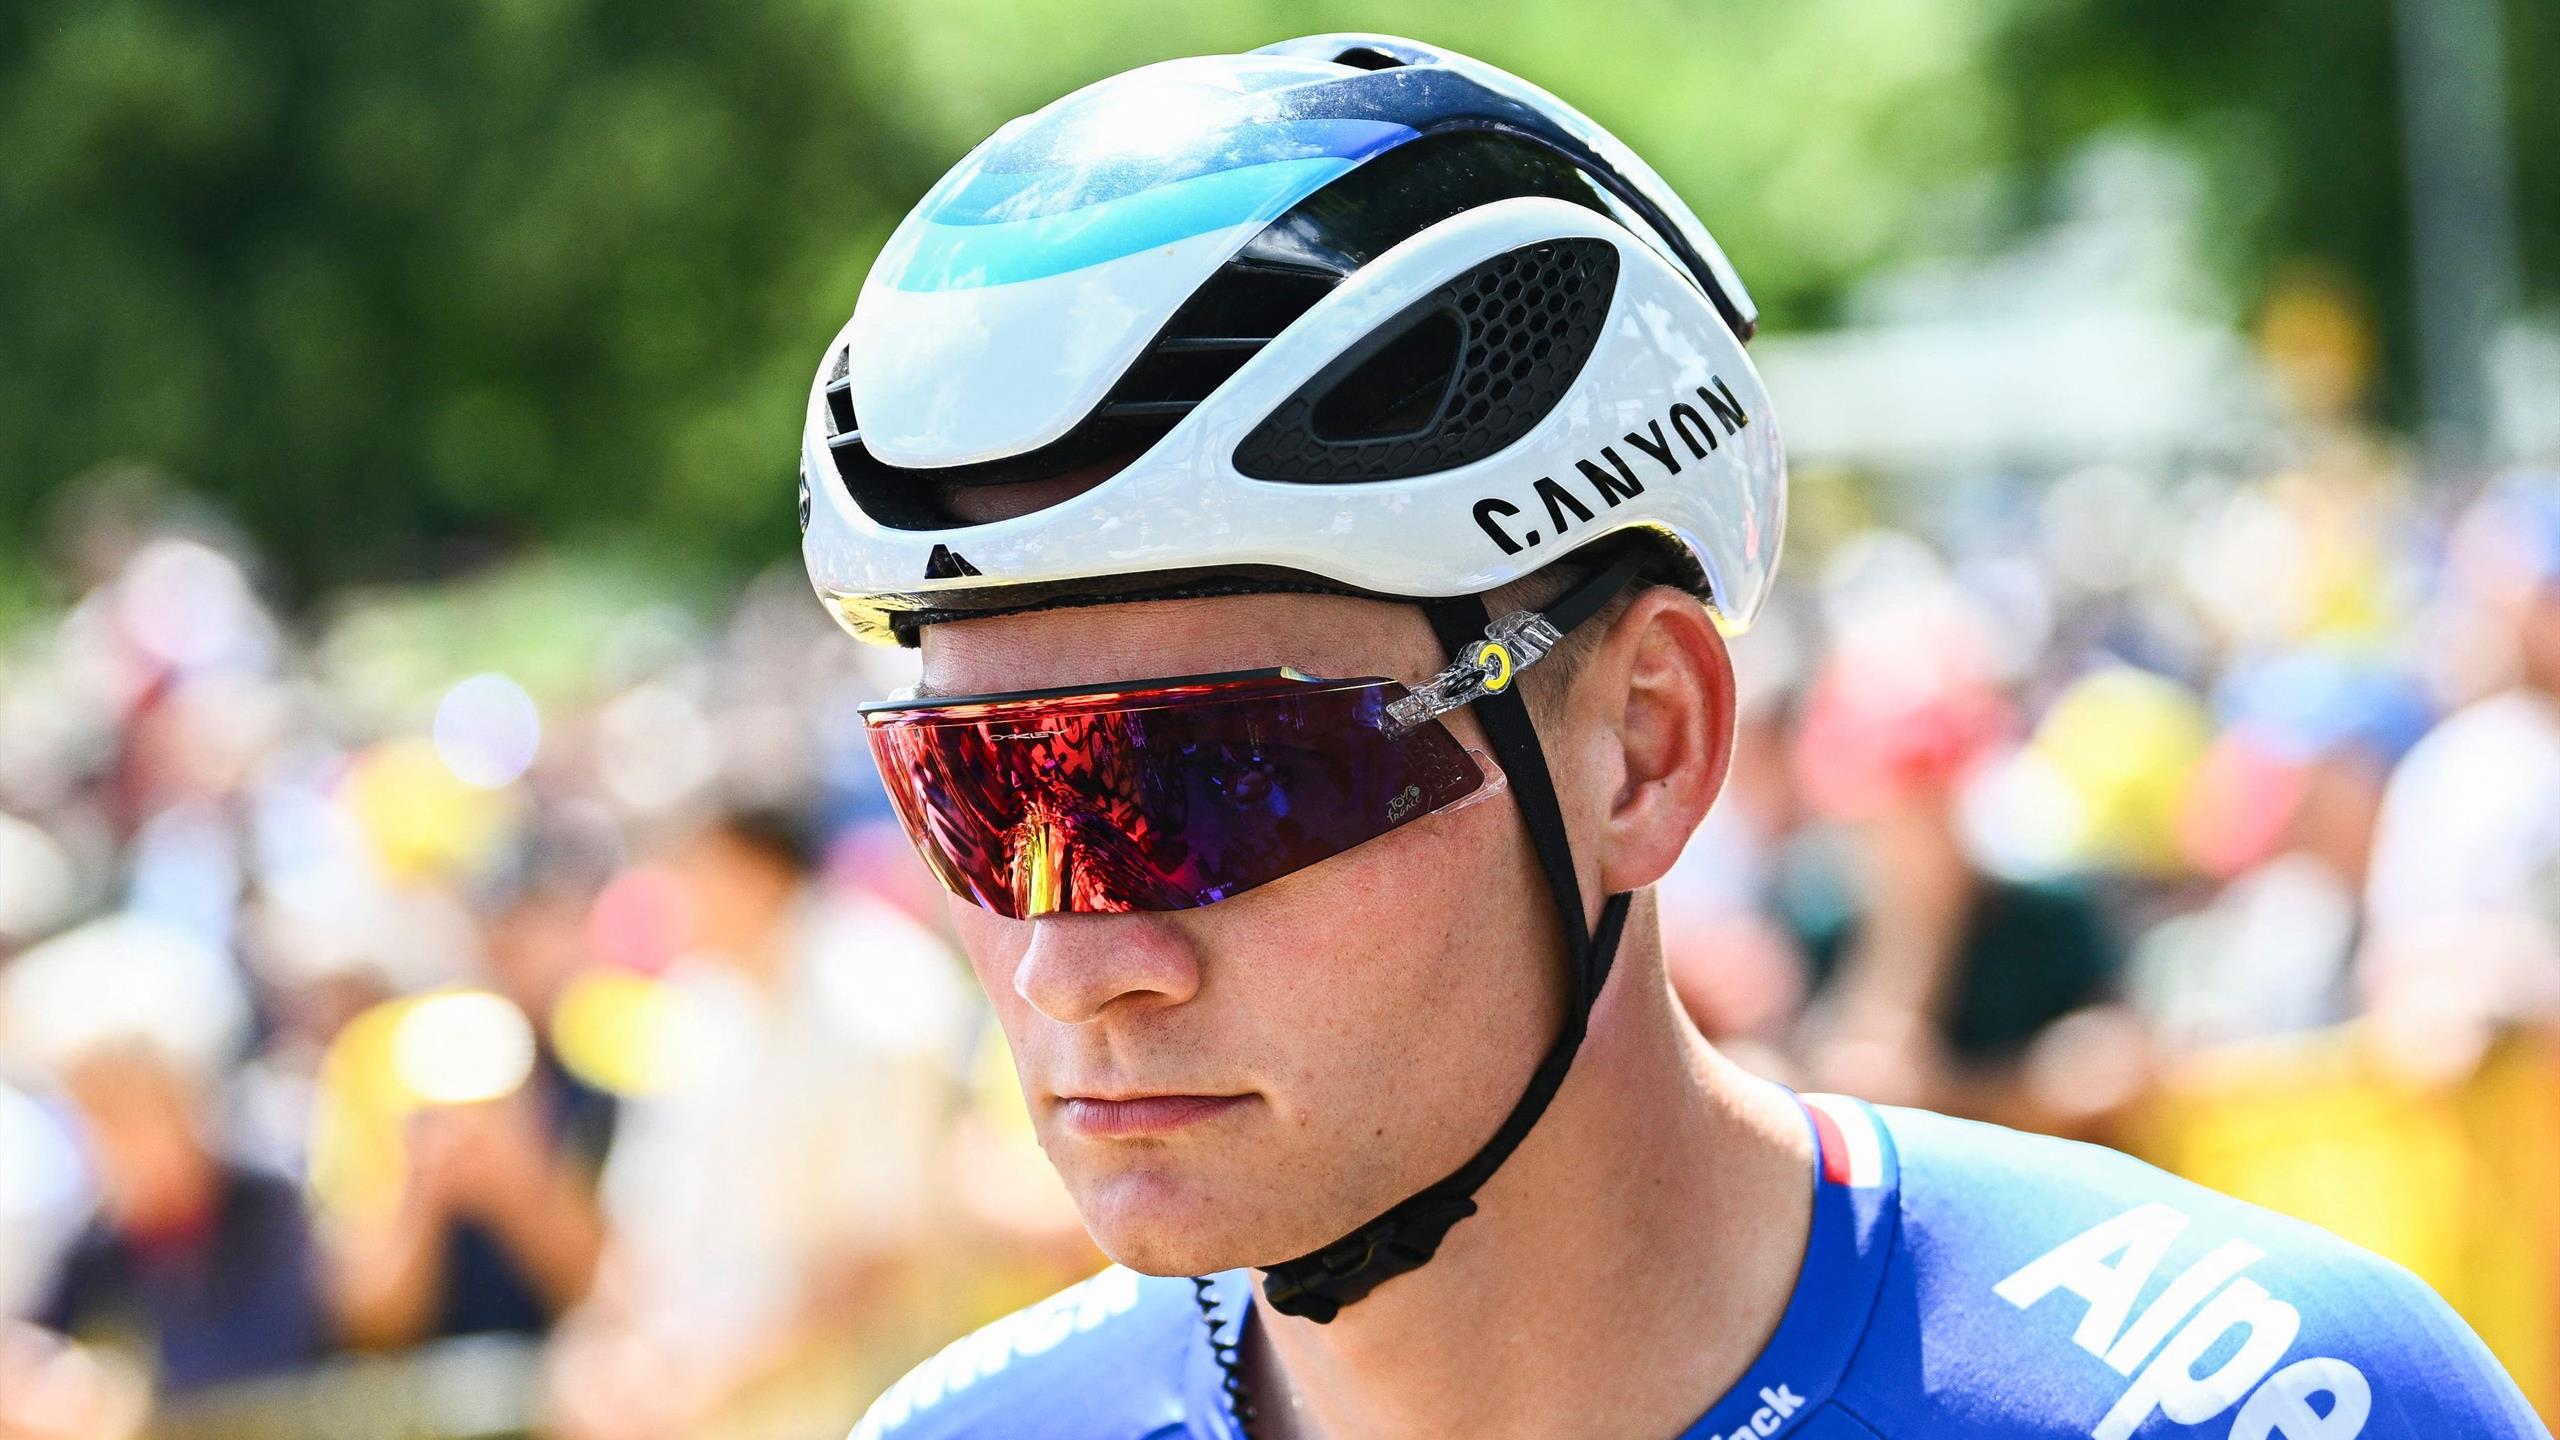 Mathieu Van der Poel Speaks About Hotel Incident Upon Arrival Home In Europe